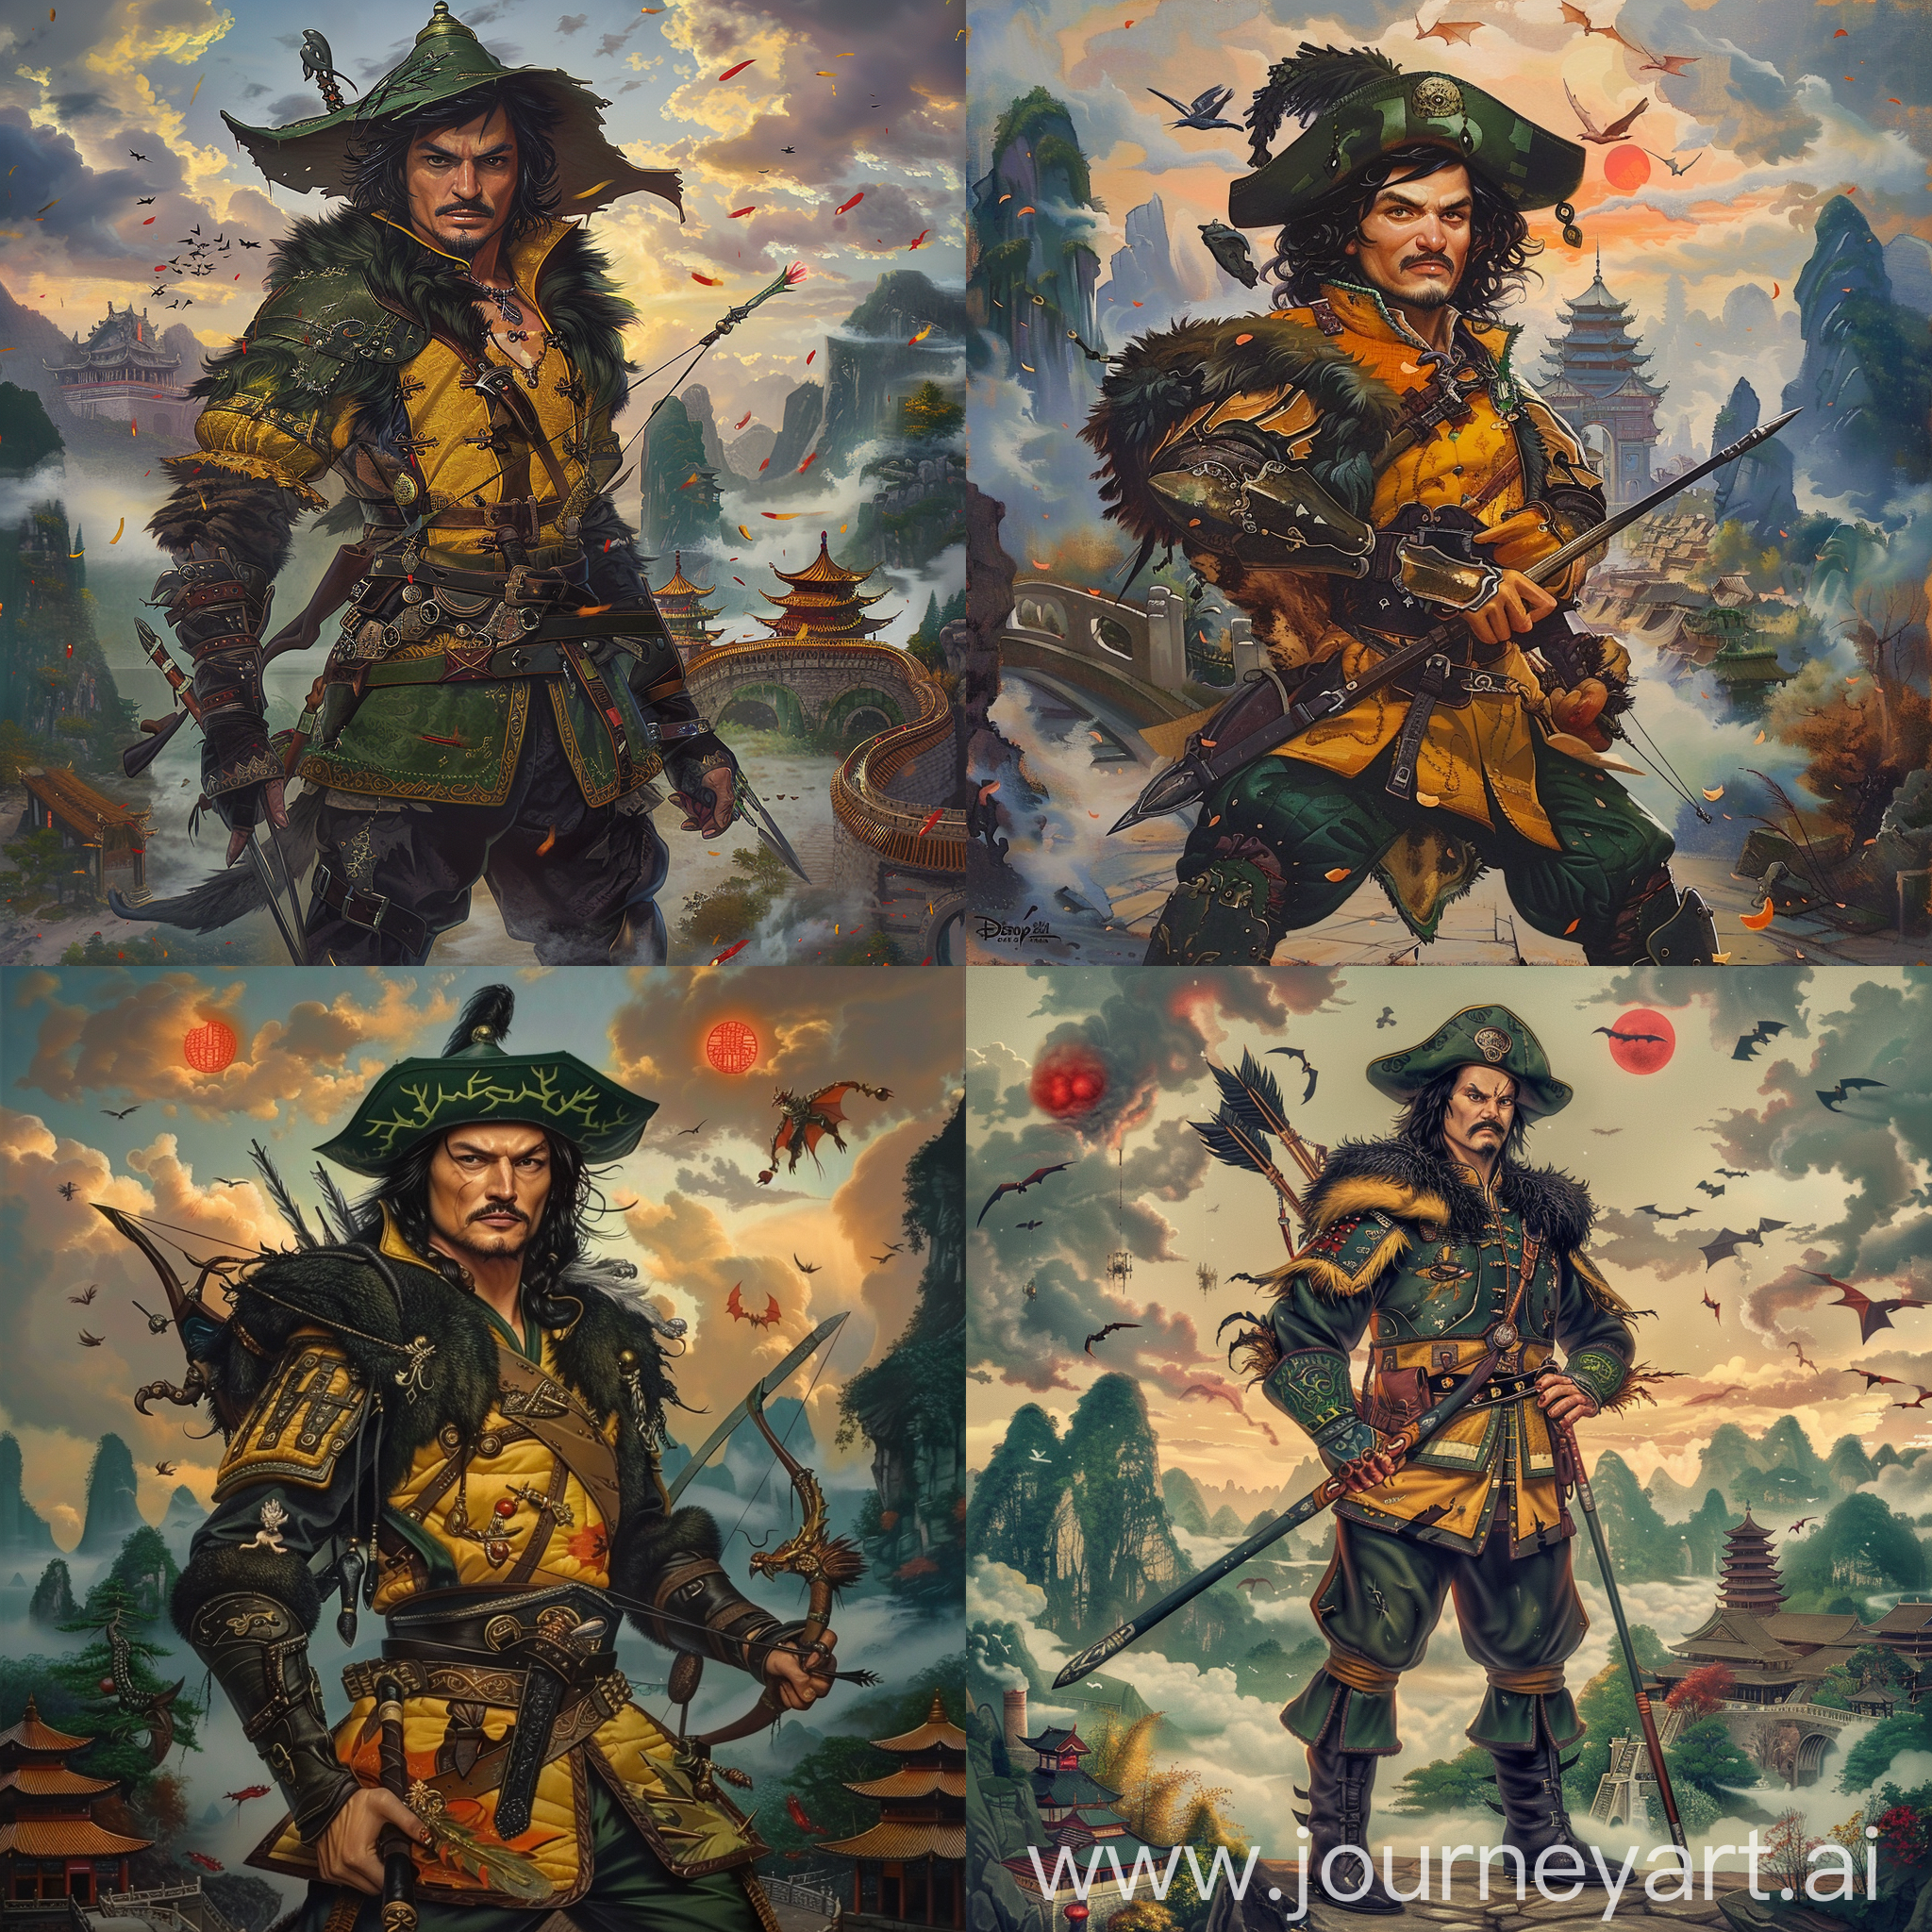 Historic painting style:

a Disney charming and mature Villain, Huntsman from Snow White Cartoon, he is 40 years old and looks like Johnny Depp, he has black mid-long hair and black mustache, he wears a dark green Robin Hood hat, he is in dark yellow and dark green color Chinese medieval furry hunter armor and boots, he holds a medieval Chinese style dagger in right hand, he also has a Chinese crossbow on his back,

Chinese Guilin mountains and temple as background,  evil iced dragons and three small red blood suns in cloudy sky.